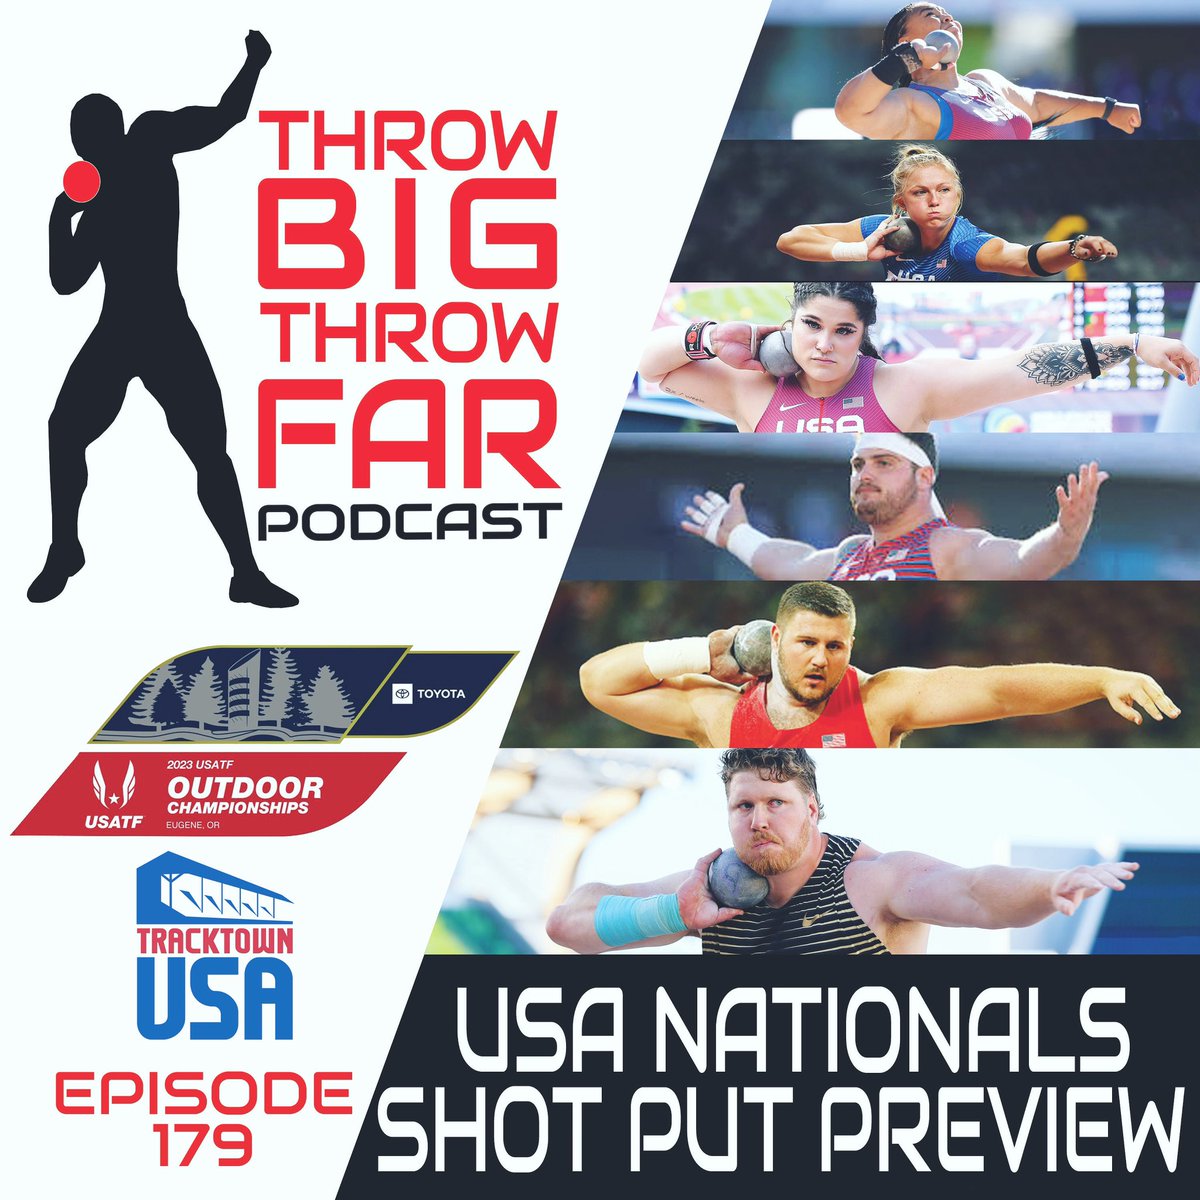 Don’t miss the SHOT PUT PREVIEW! @karathrowsjav @McThrows @TrackTownUSA podcasts.apple.com/us/podcast/thr…